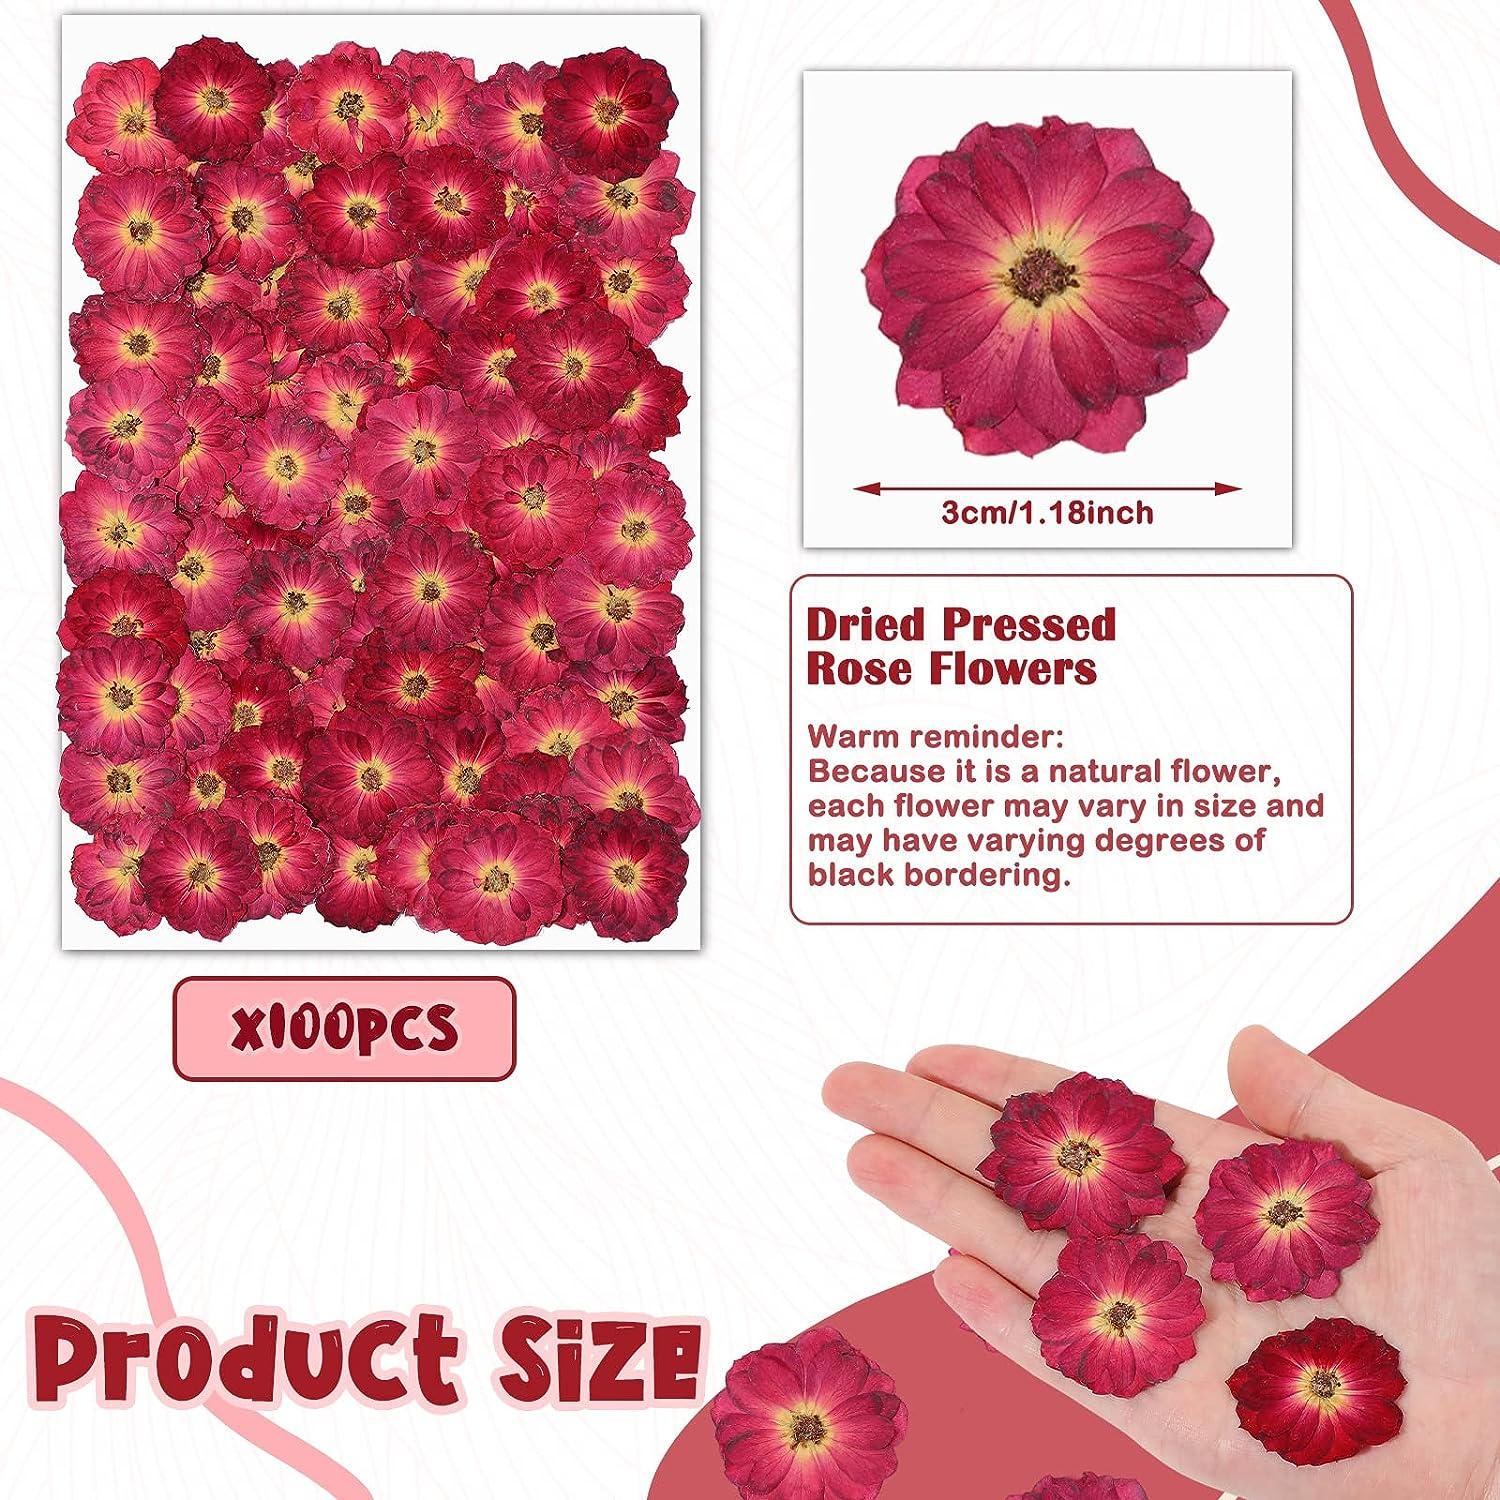 Dried Real Flowers for Crafts Pressed Red Crystal Chrysanthemum Dry Pressed  Flower Art Dried Real Flowers 123.85x90.09mm HM1041 